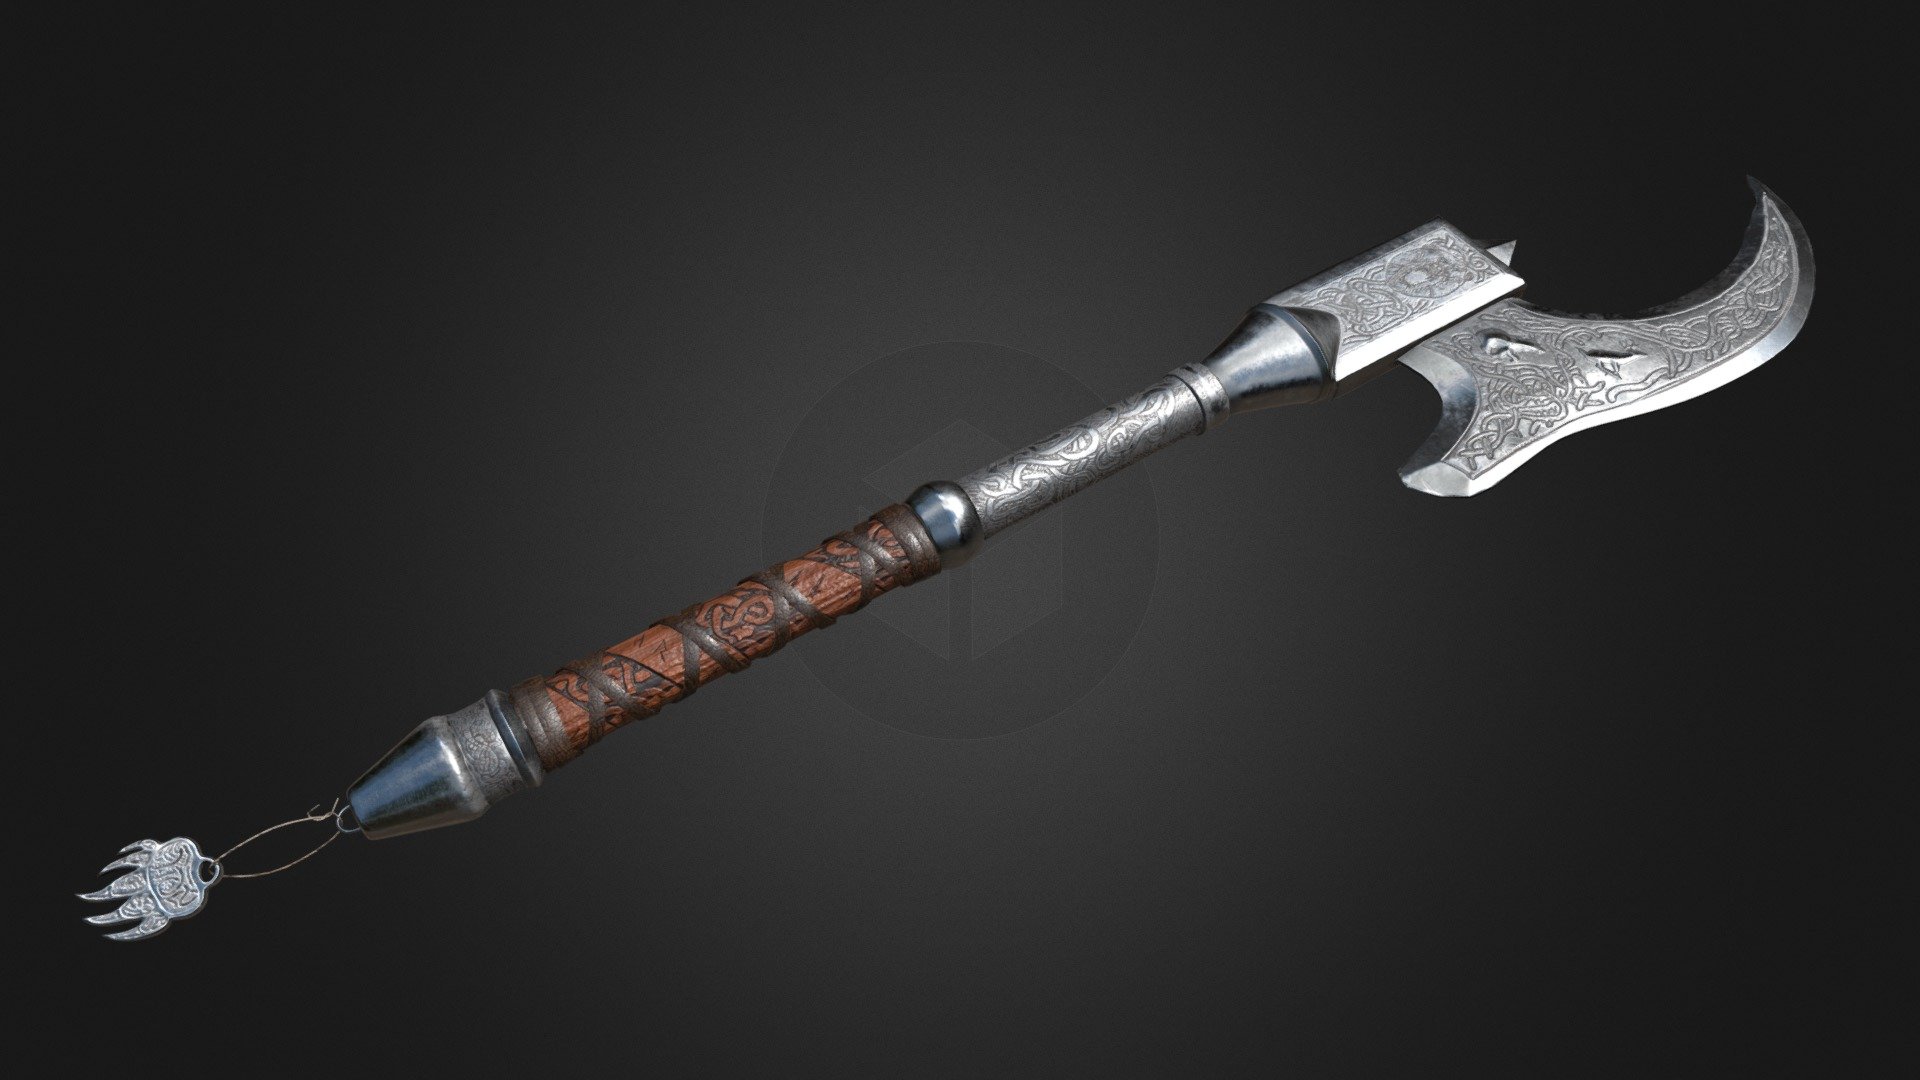 ESO fan art. This is the axe my character Hjalmar was gifted by his friend. It is the shape of the Silken Ring style axe, but a bit more &ldquo;Nordified